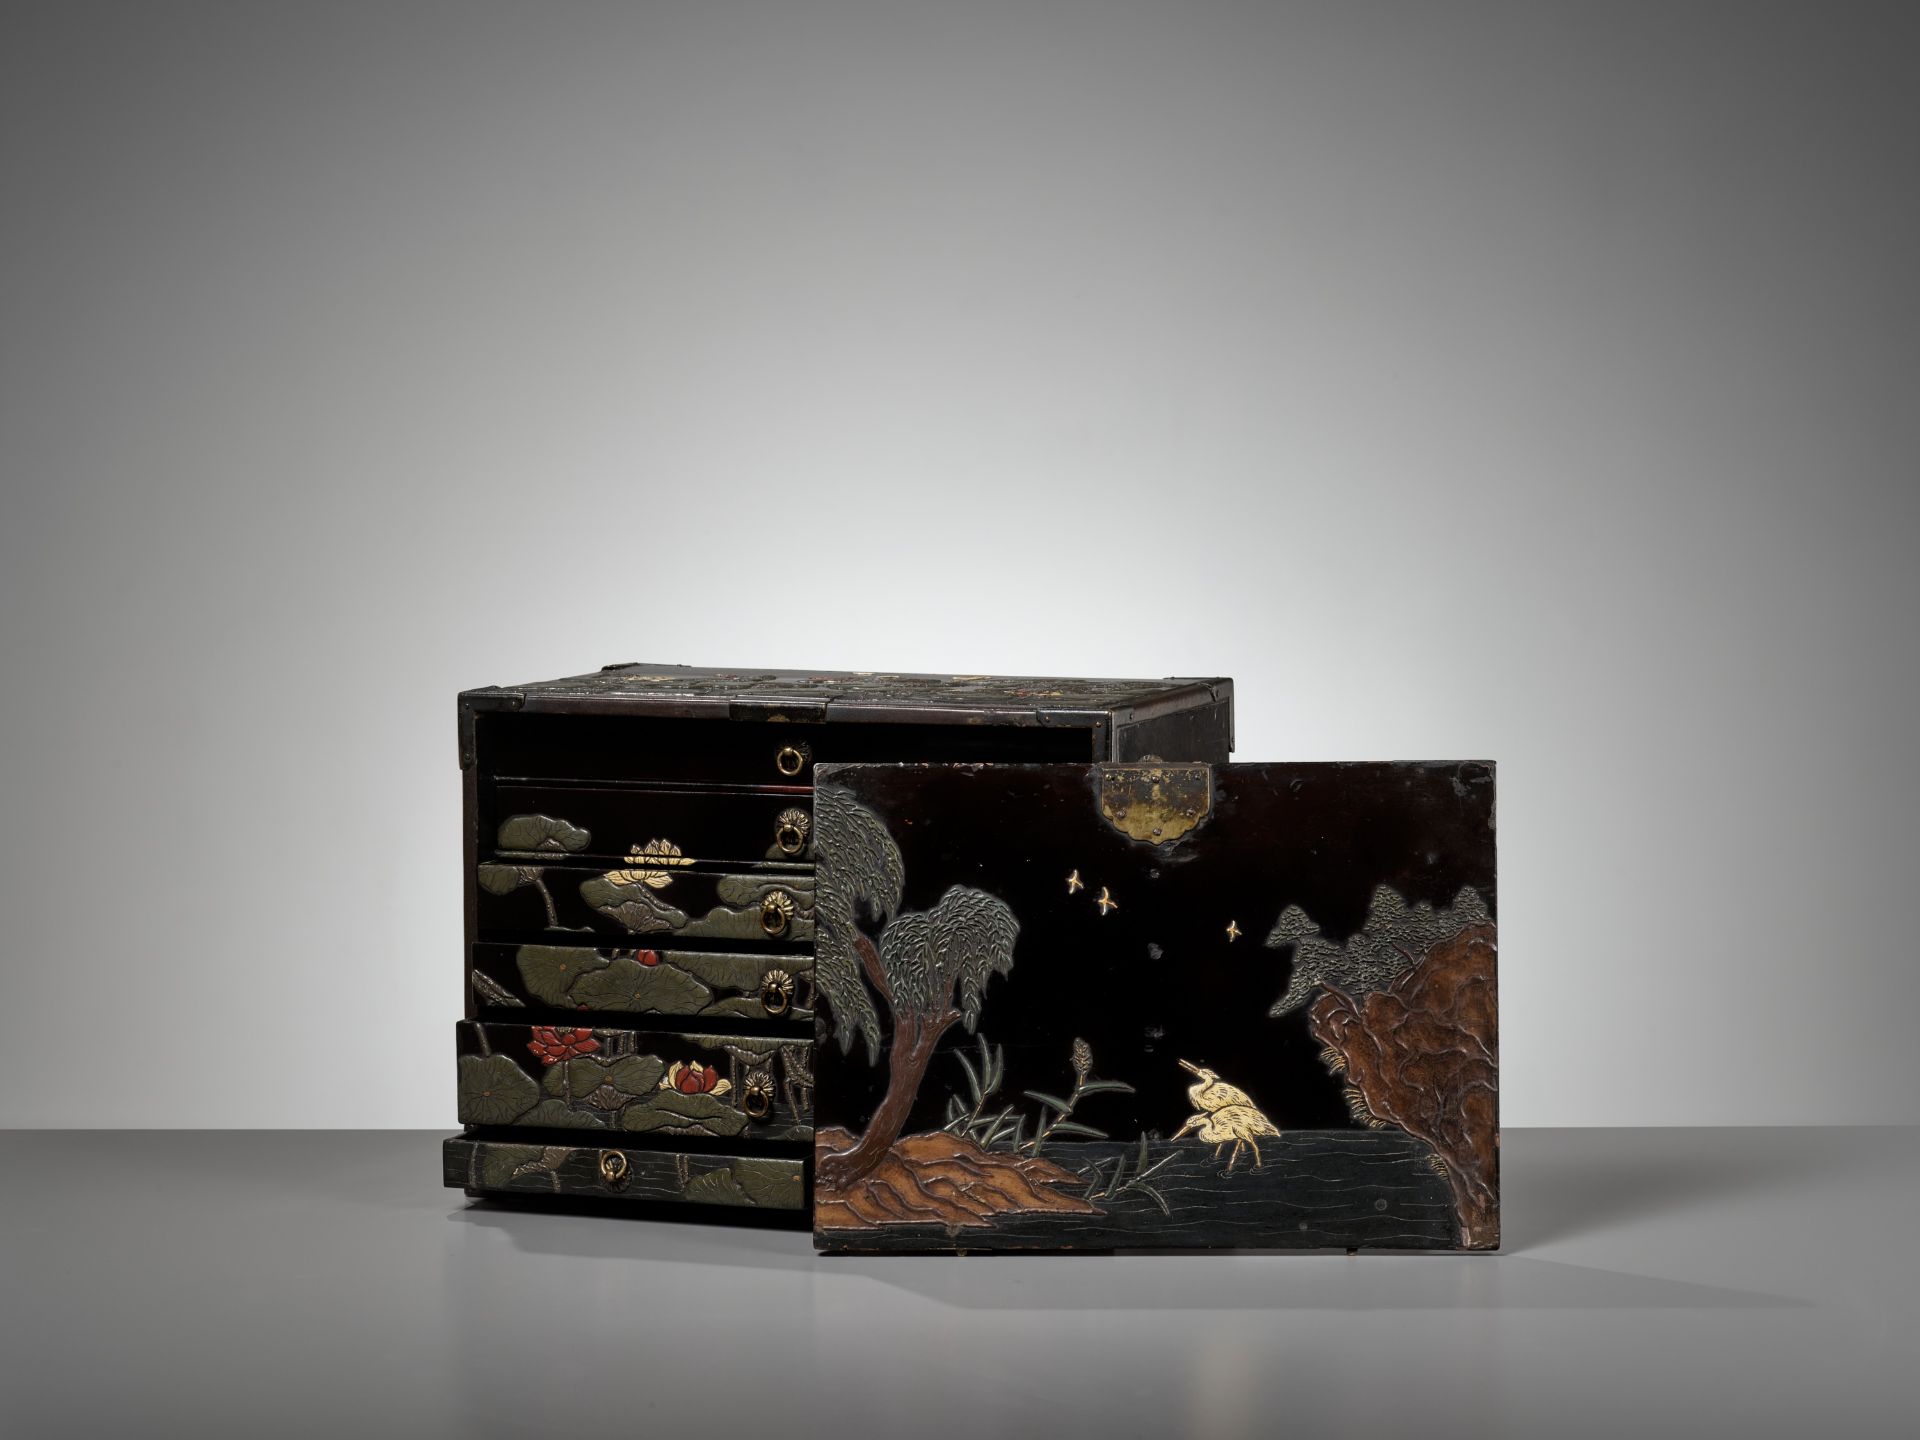 A RITSUO STYLE CERAMIC-INLAID AND LACQUERED WOOD KODANSU (CABINET) WITH A LOTUS POND AND EGRETS - Image 3 of 14